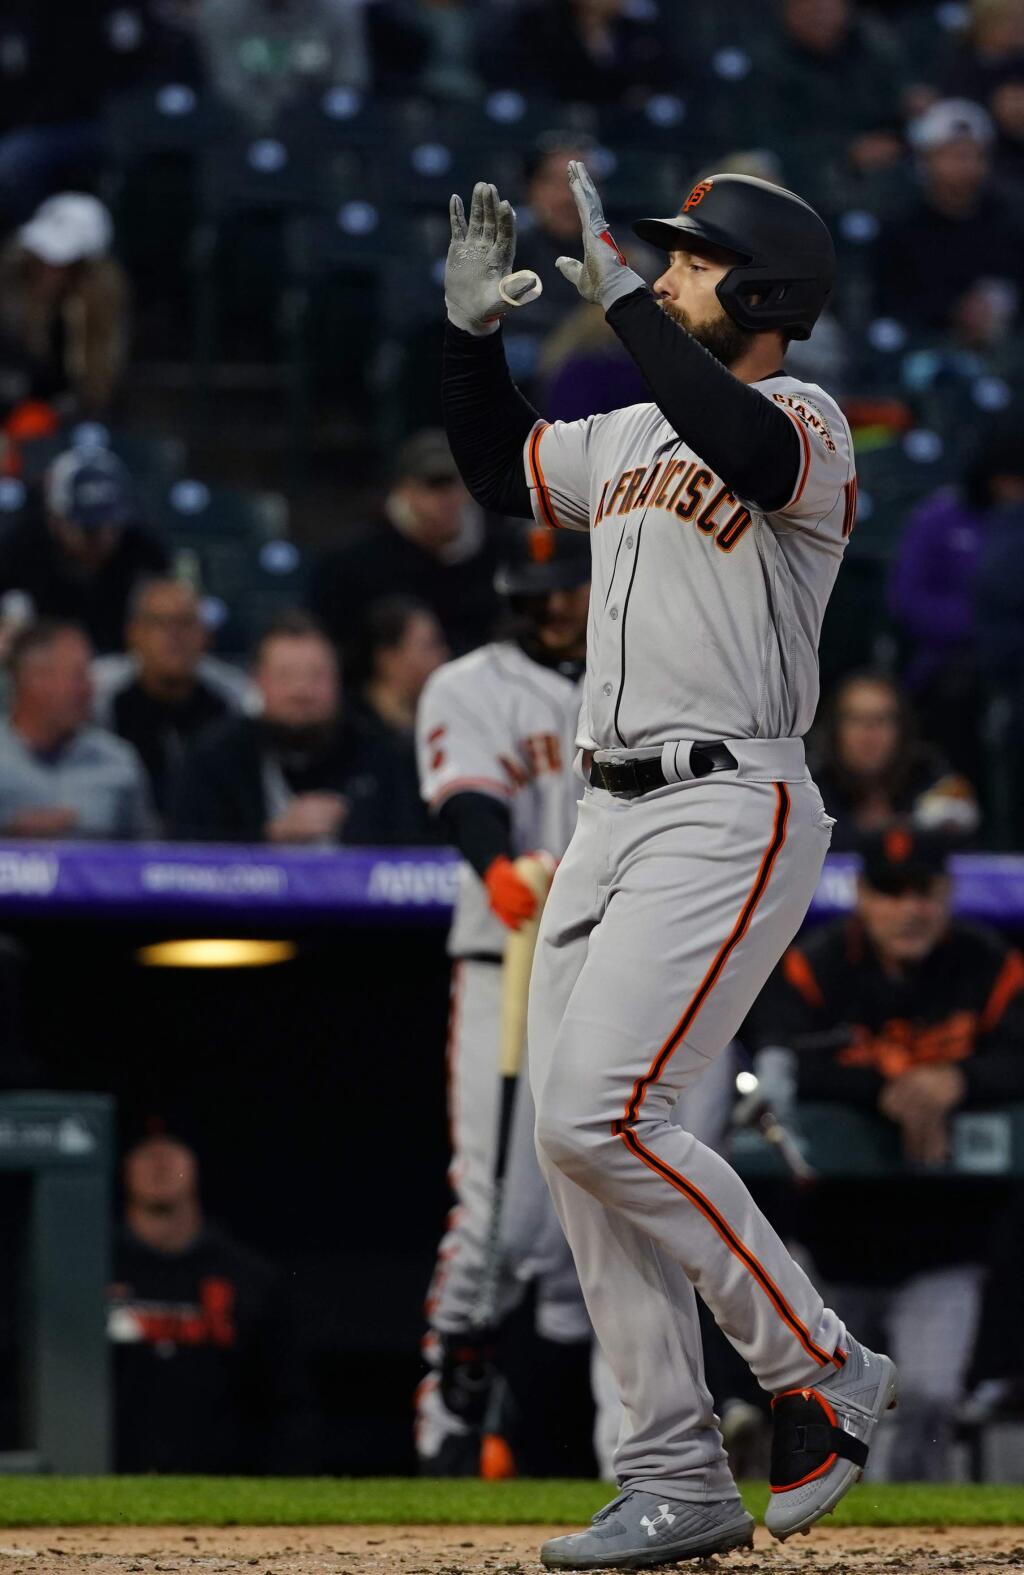 The San Francisco Giants' Mac Williamson celebrates a three-run home run against the Colorado Rockies during the fourth inning, Tuesday, May 7, 2019, in Denver. (AP Photo/Jack Dempsey)